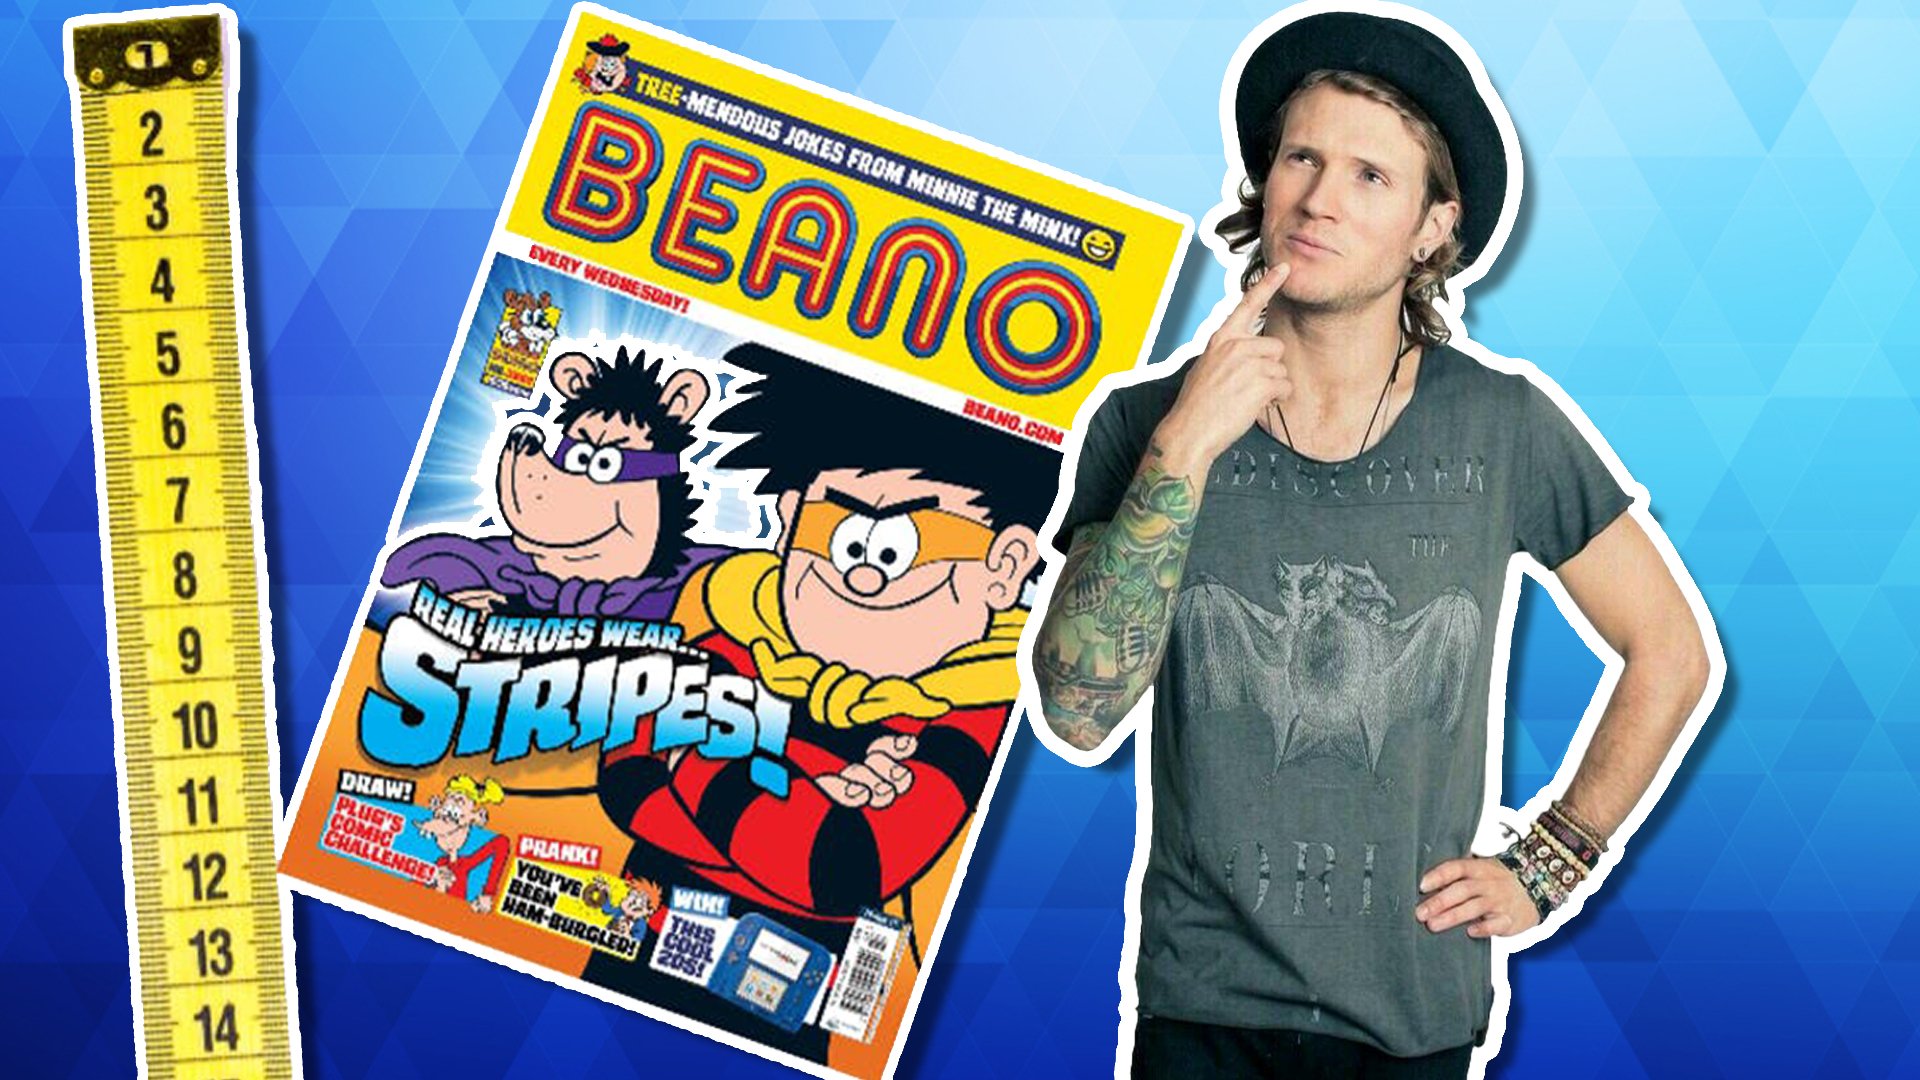 Dougie standing against a copy of the Beano